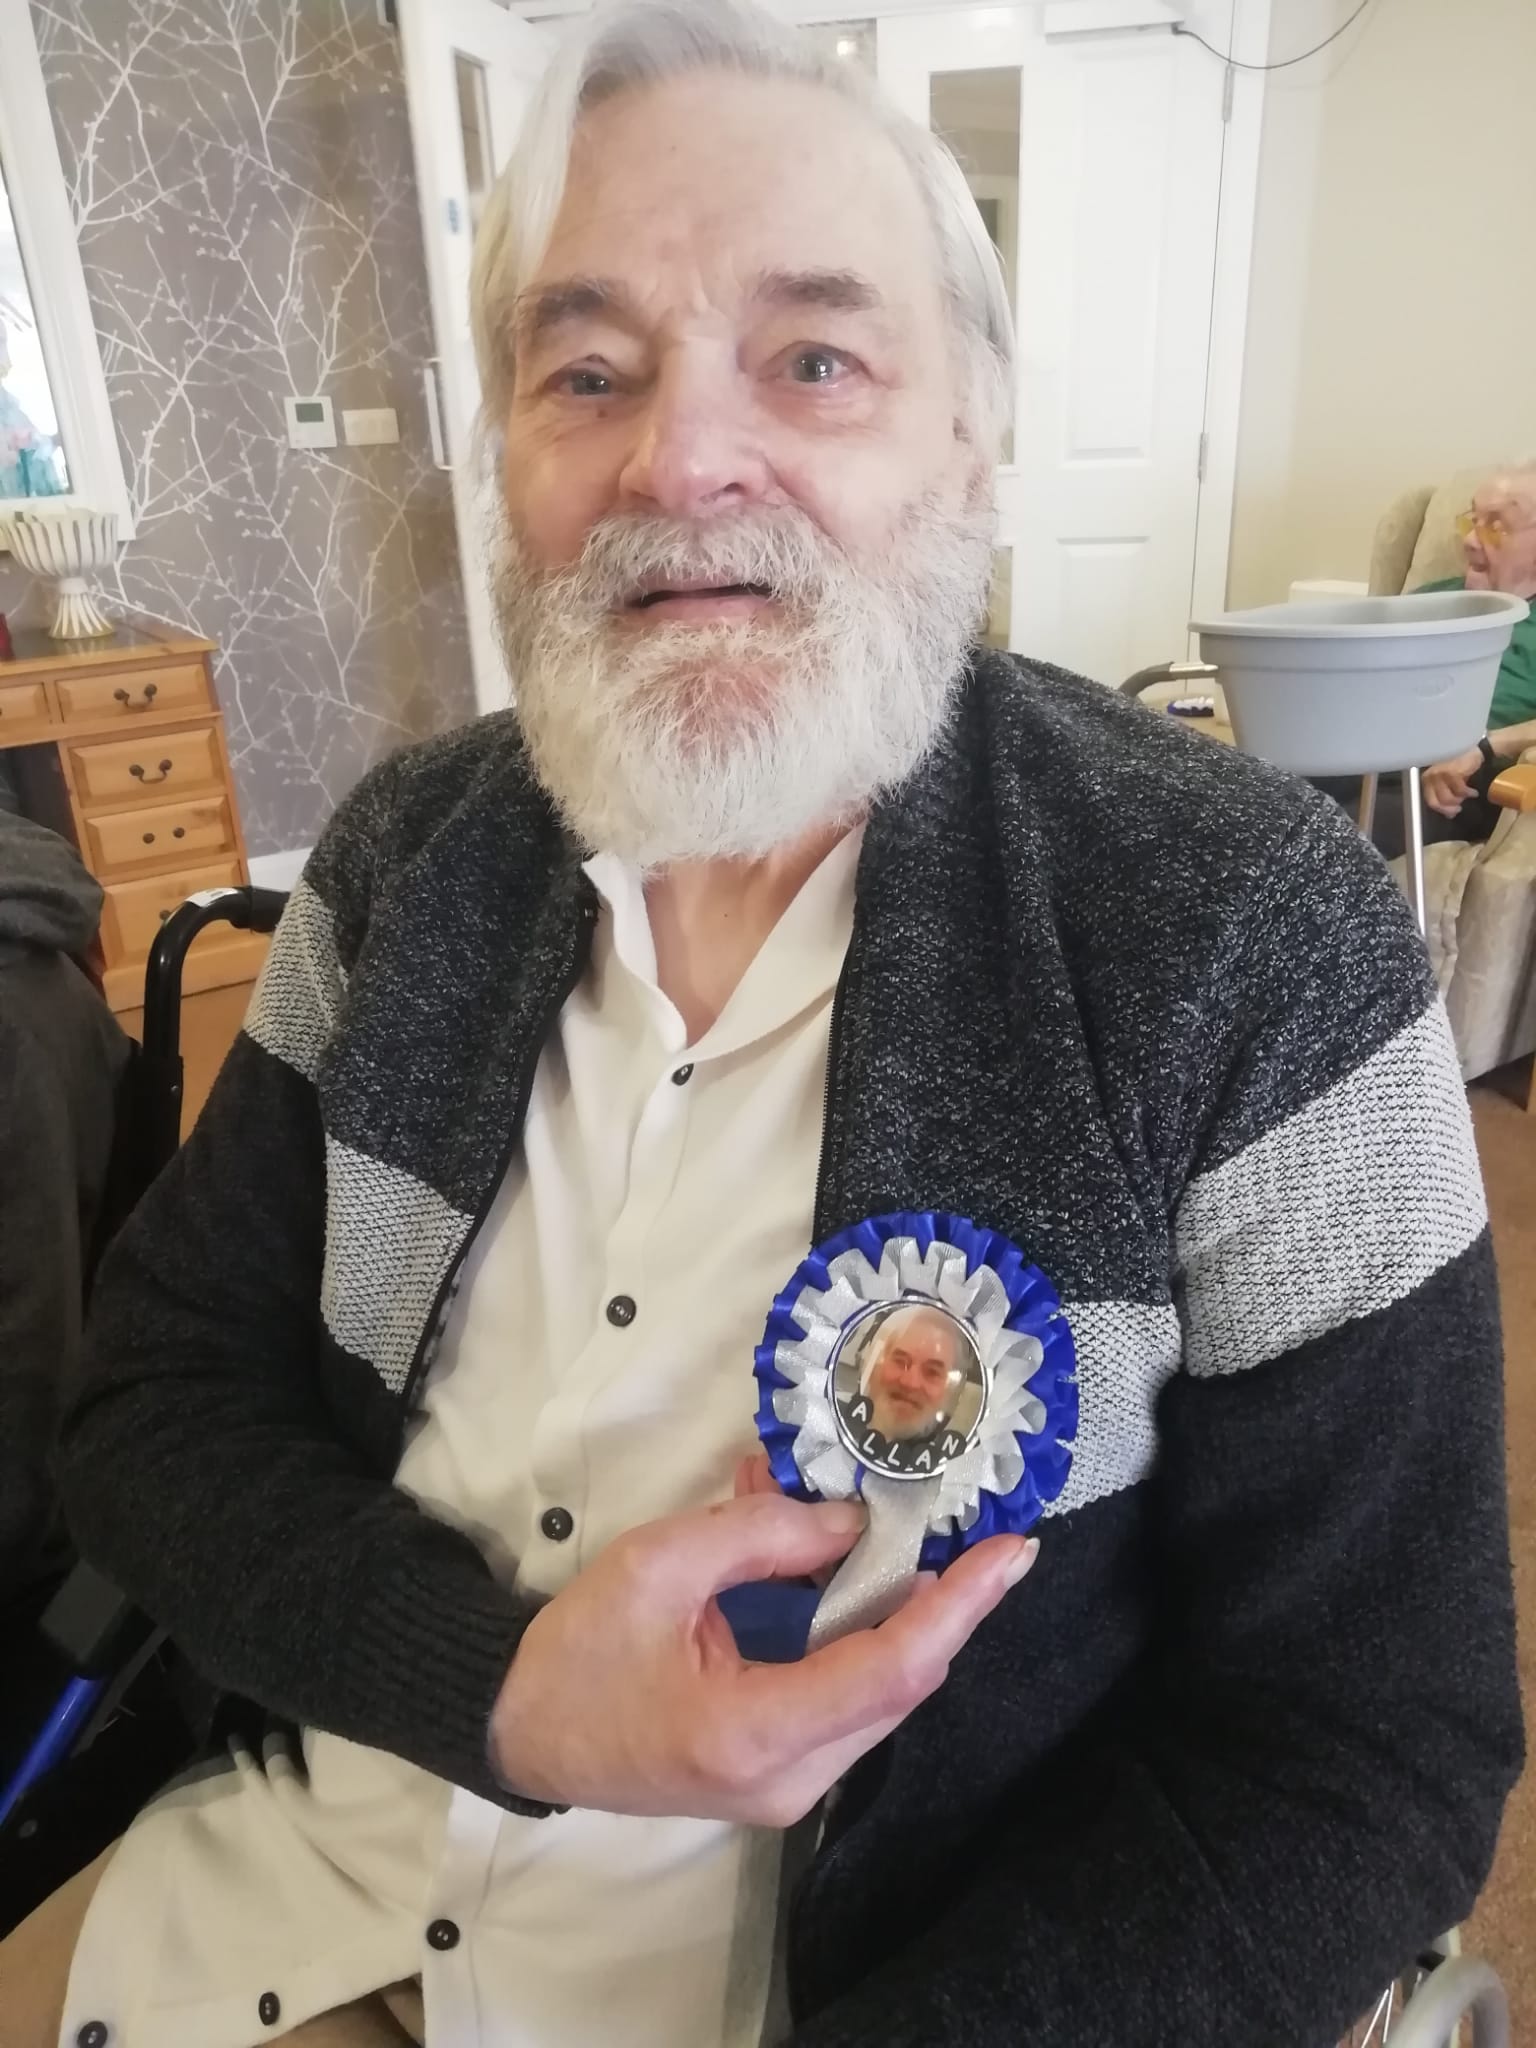 Gentleman wearing a blue and white rosette decorated with an image and other details